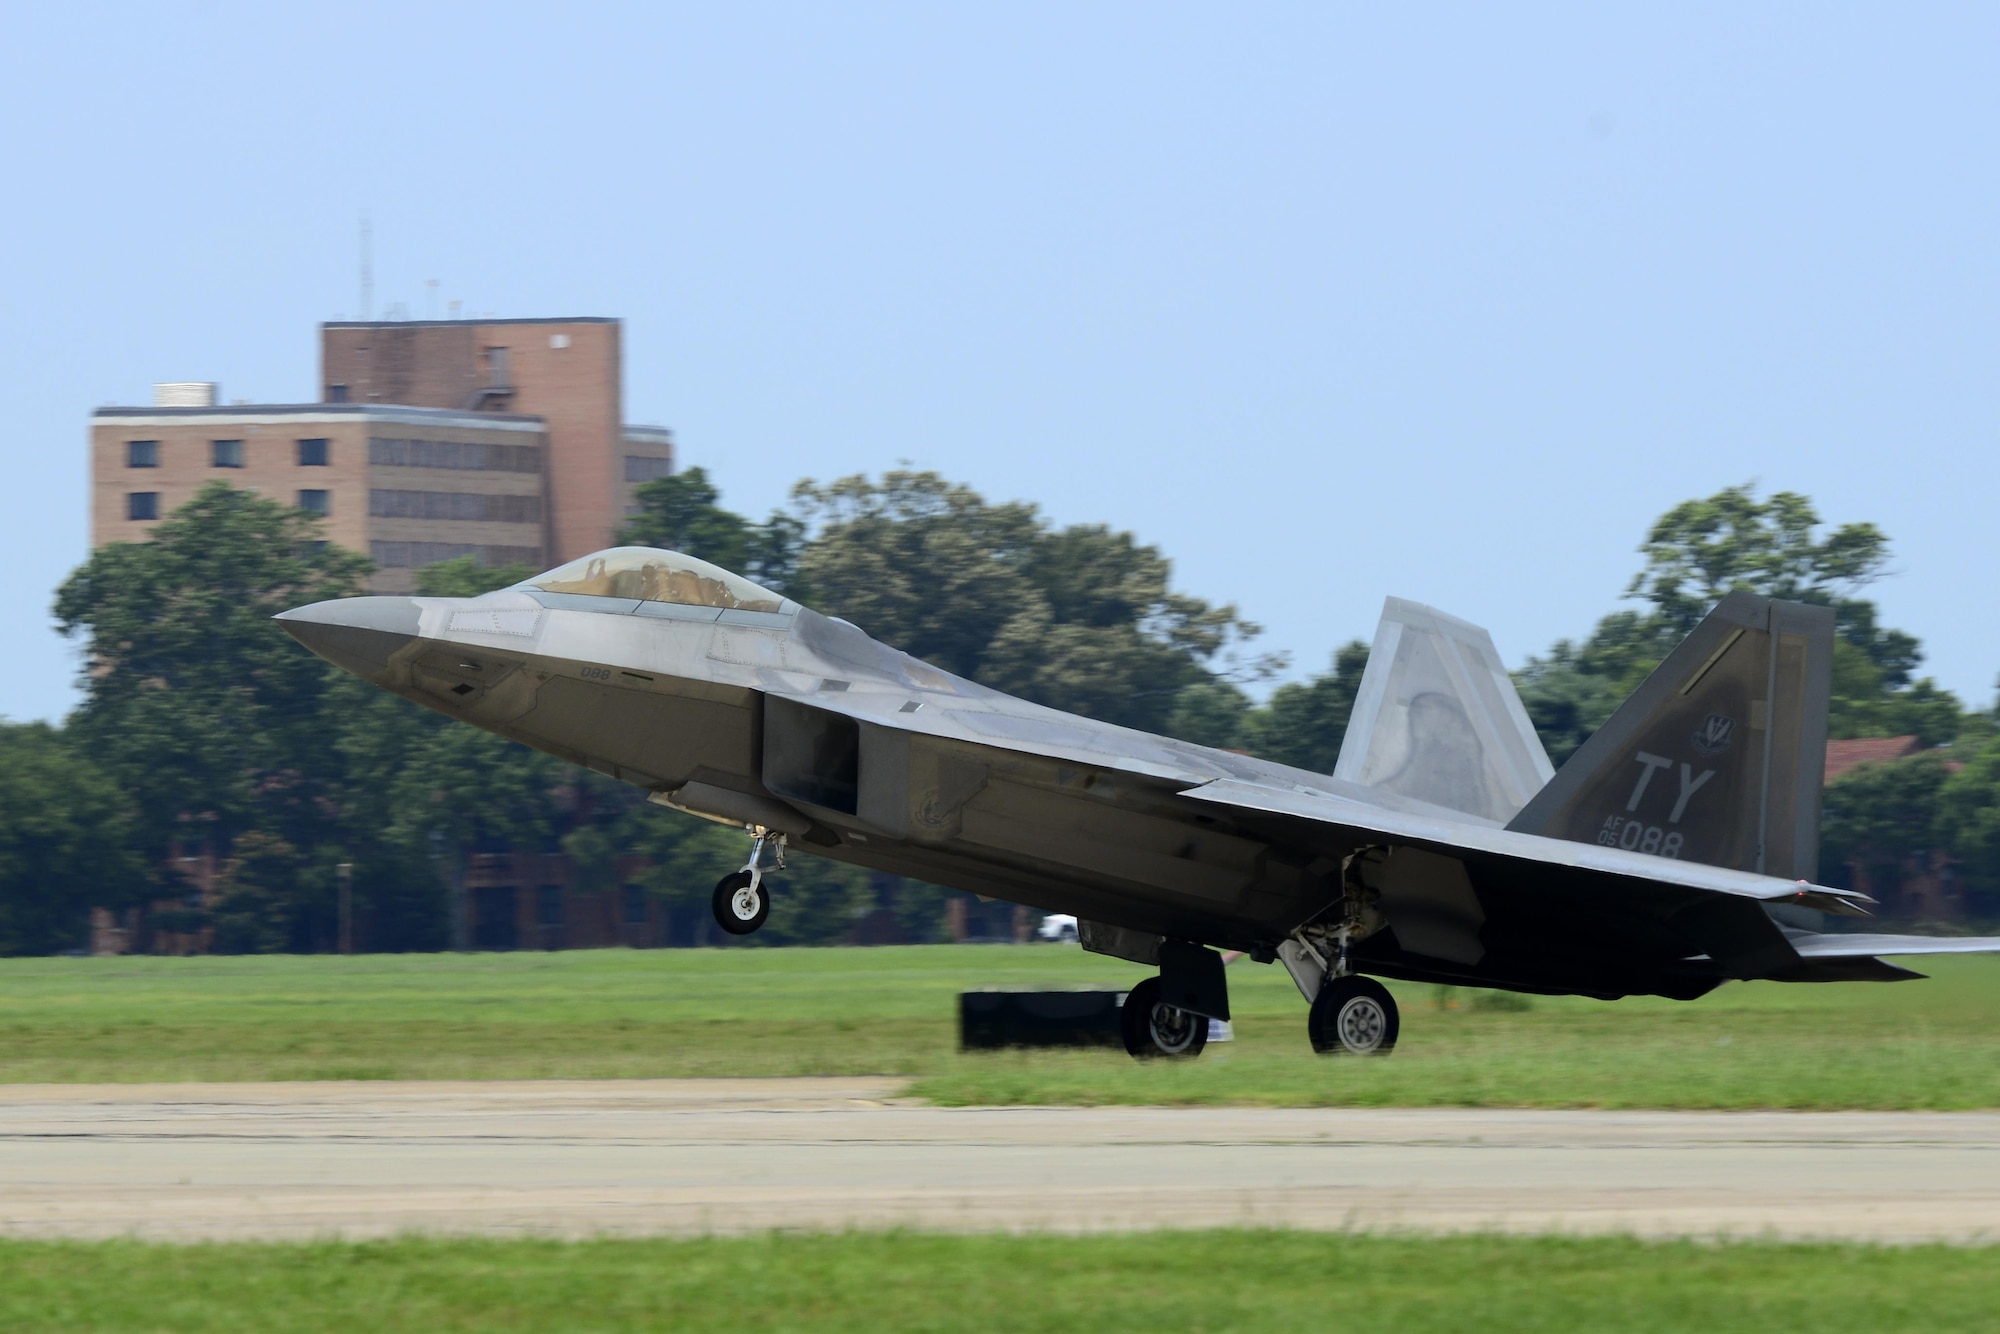 A U.S. Air Force F-22 Raptor lands at Langley Air Force Base, Va., following a 95th Anniversary Maj. Gen. William “Billy” Mitchell memorial reenactment, July 22, 2016. Each year, Air Force Airmen honor Mitchell, a U.S. Army general regarded as the father of the Air Force. (U.S. Air Force photo by Staff Sgt. R. Alex Durbin)